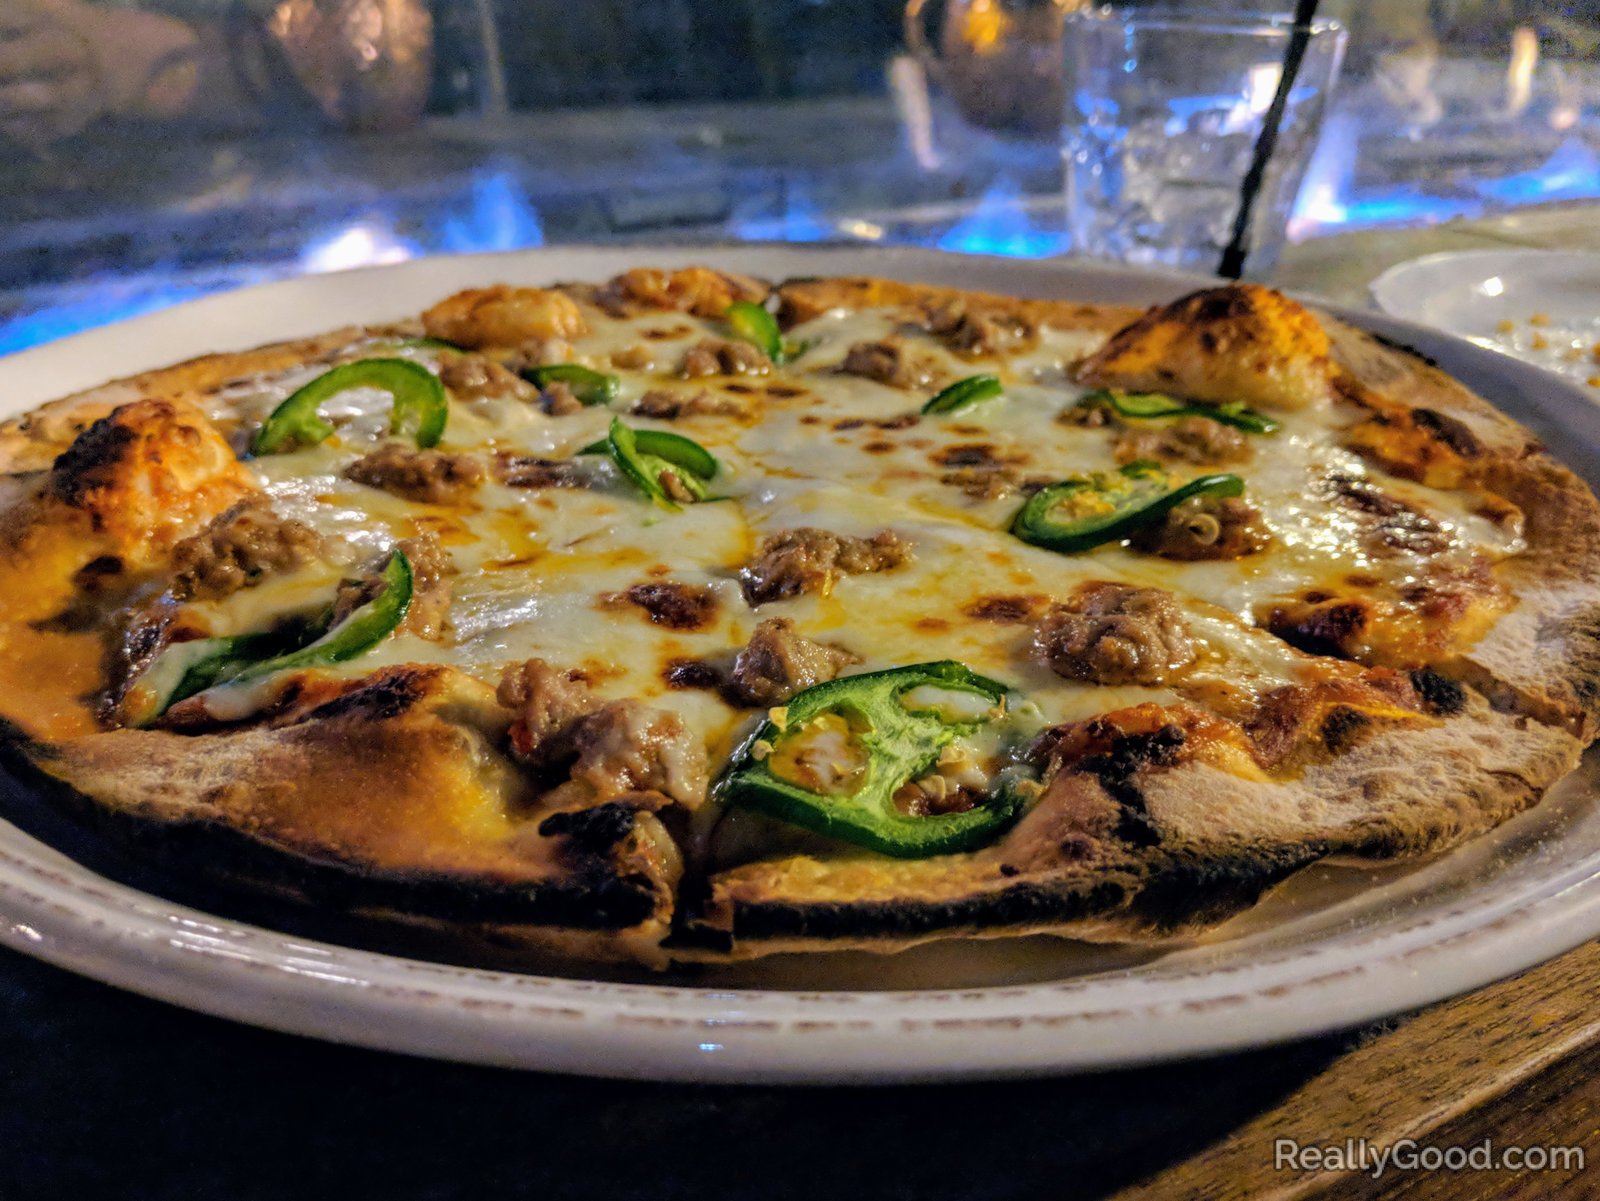 Woodfired pizza from Stillwater in Dana Point, CA